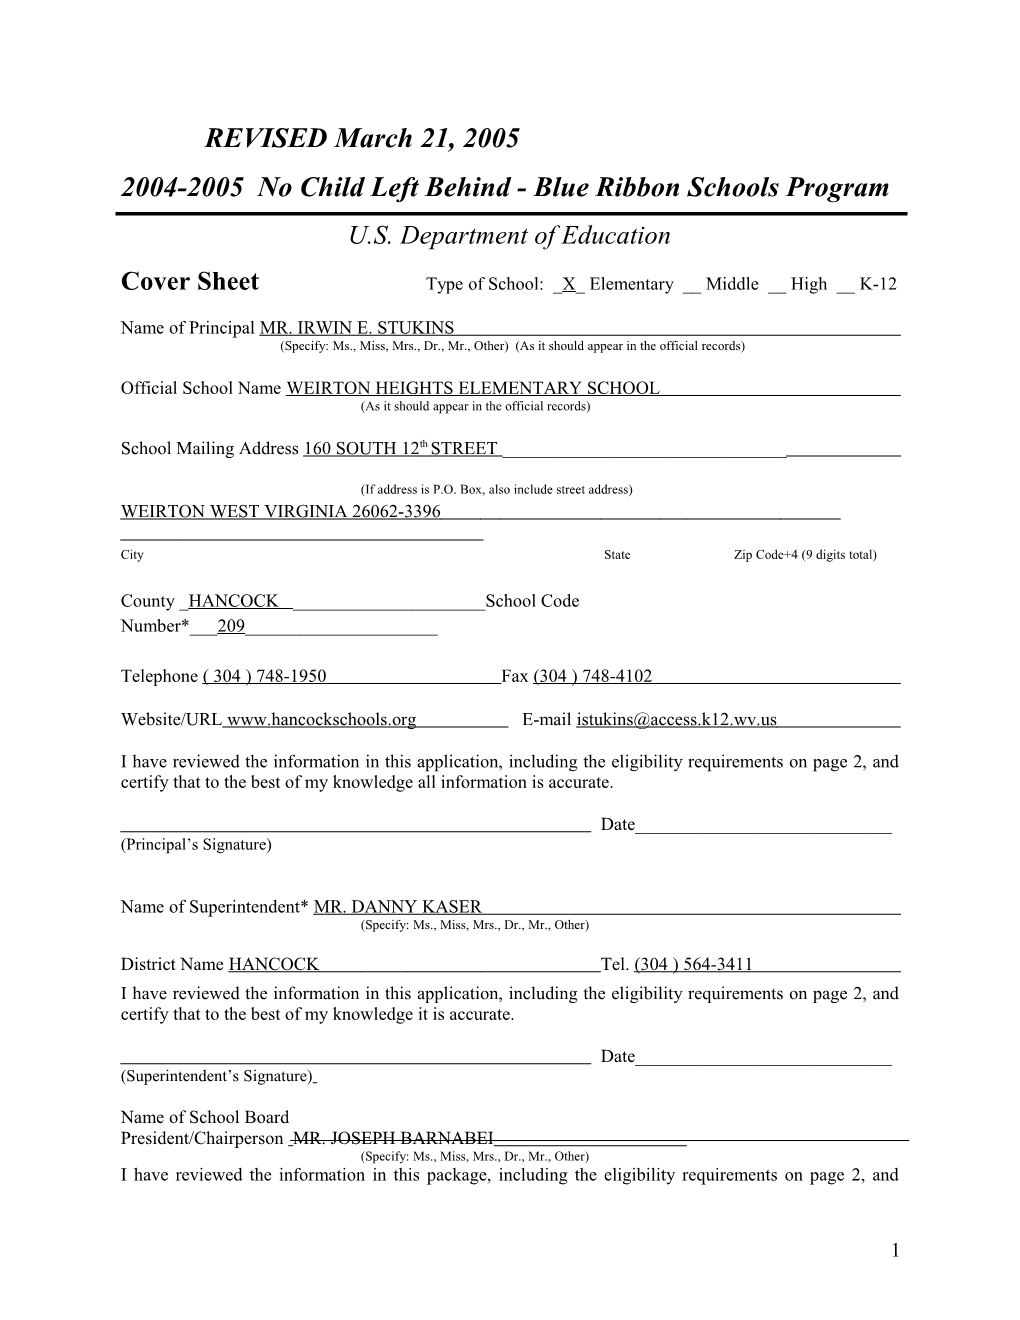 Weirton Heights Elementary School Application: 2004-2005, No Child Left Behind - Blue Ribbon